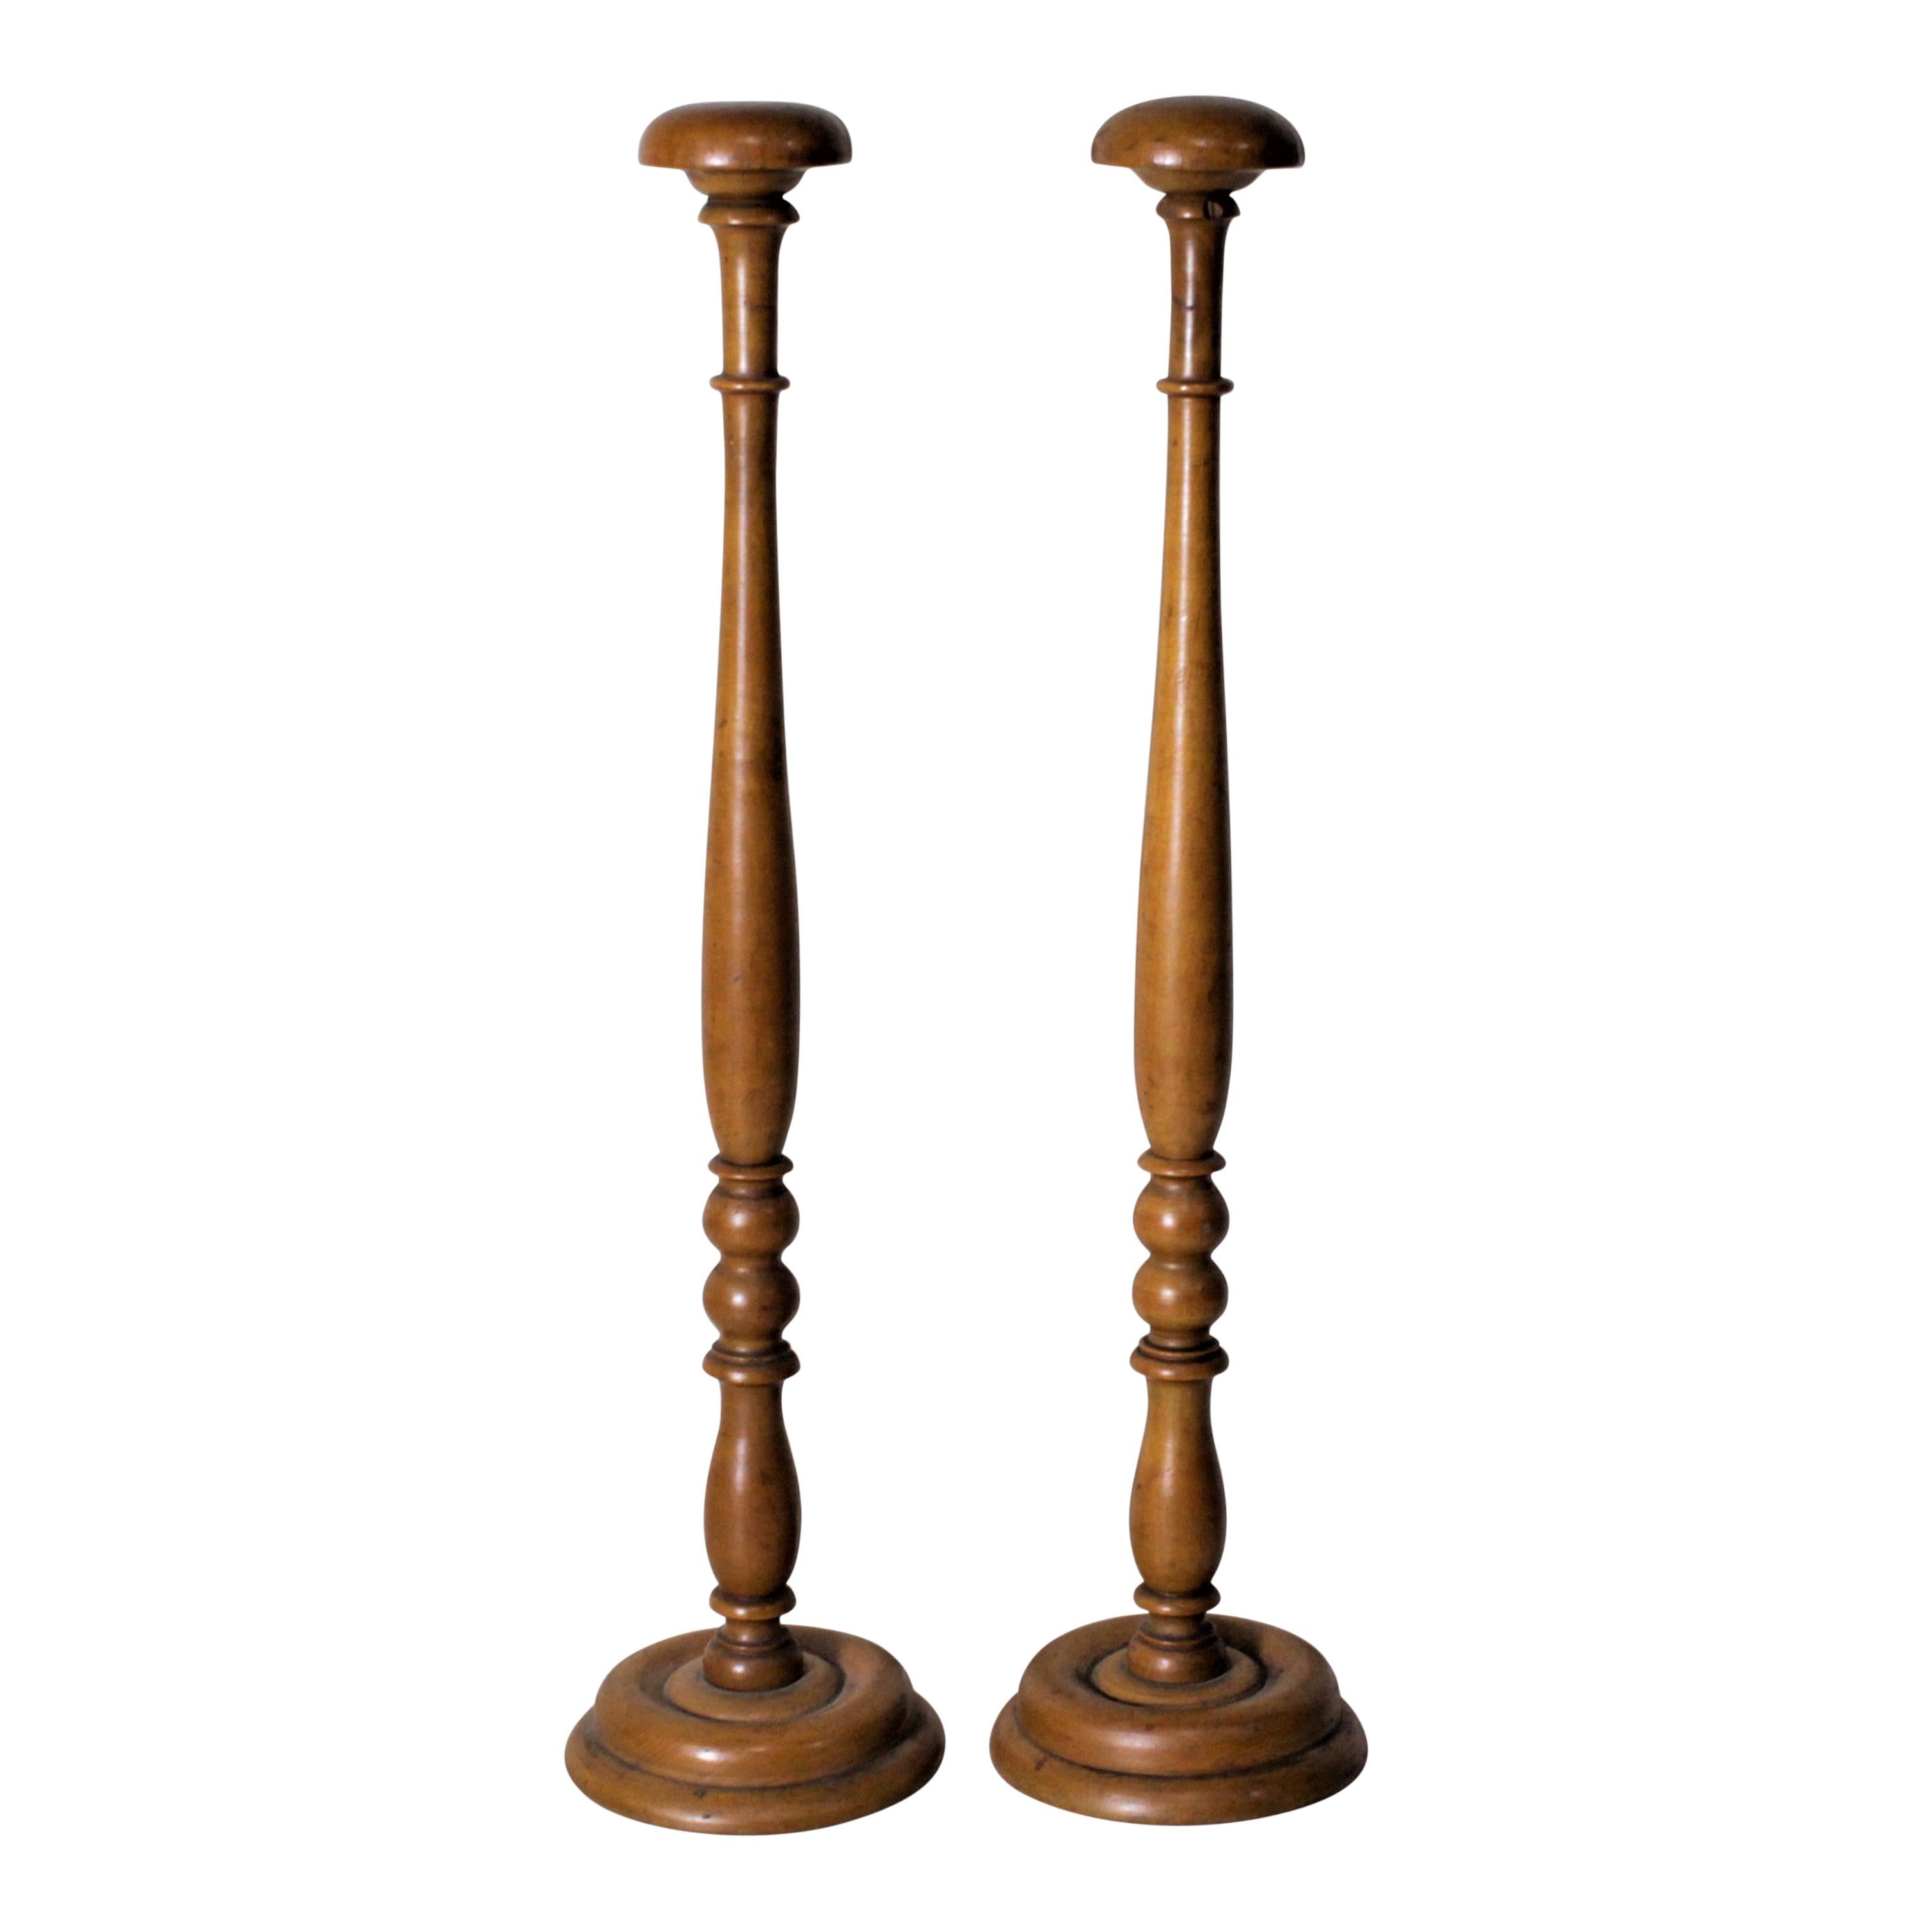 Pair of Antique Turned Wooden Hat Stands